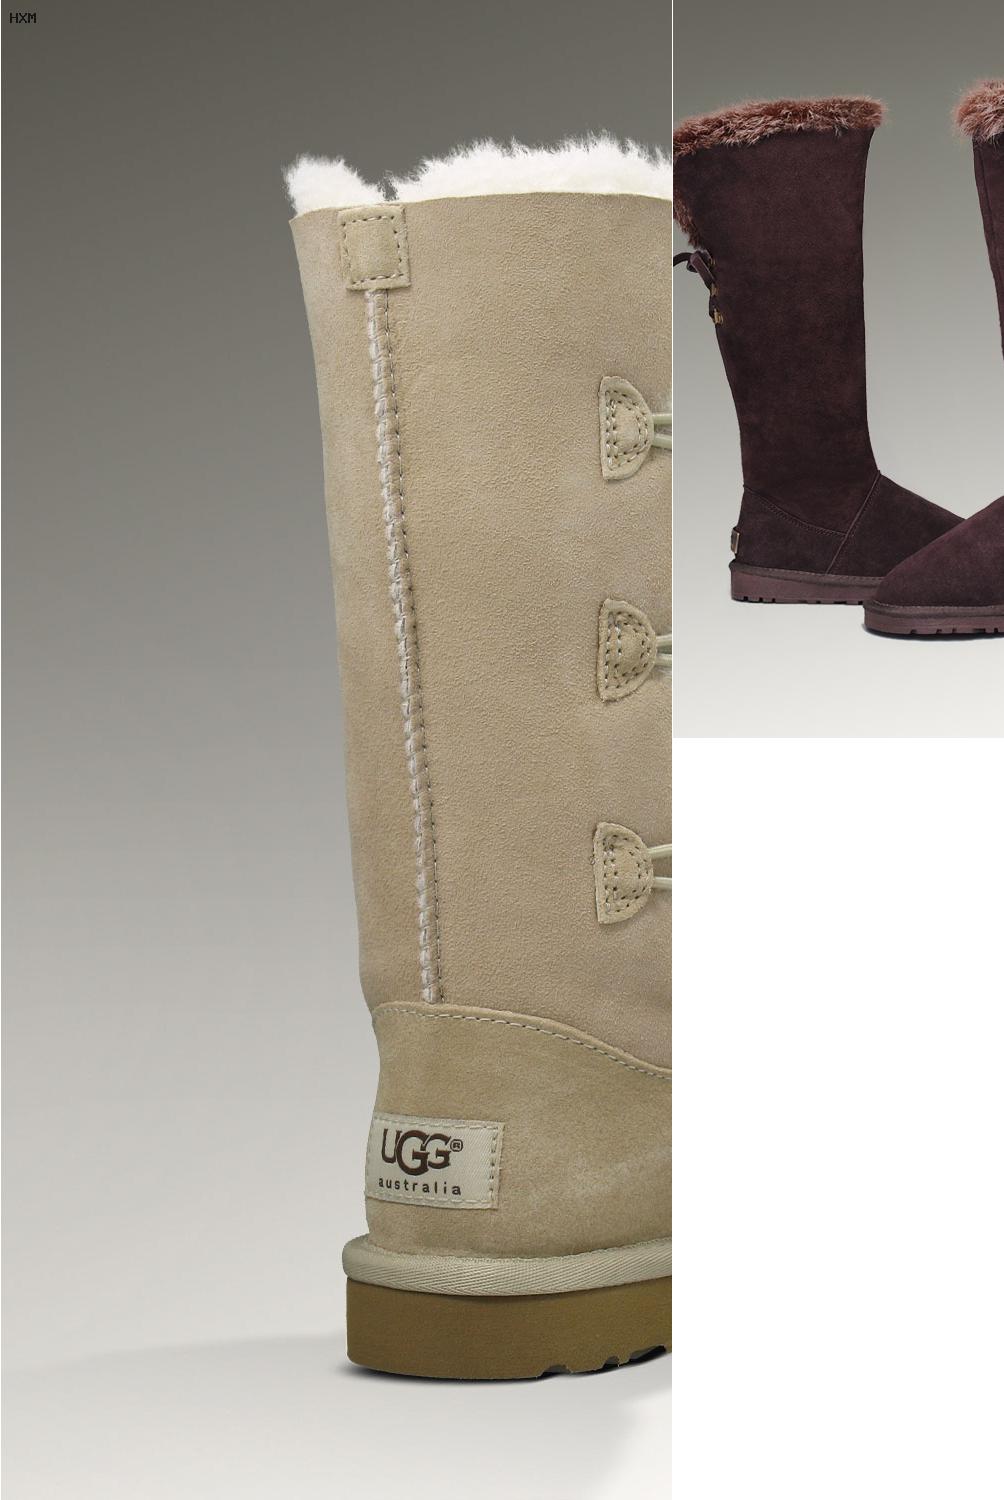 manning shoes ugg boots